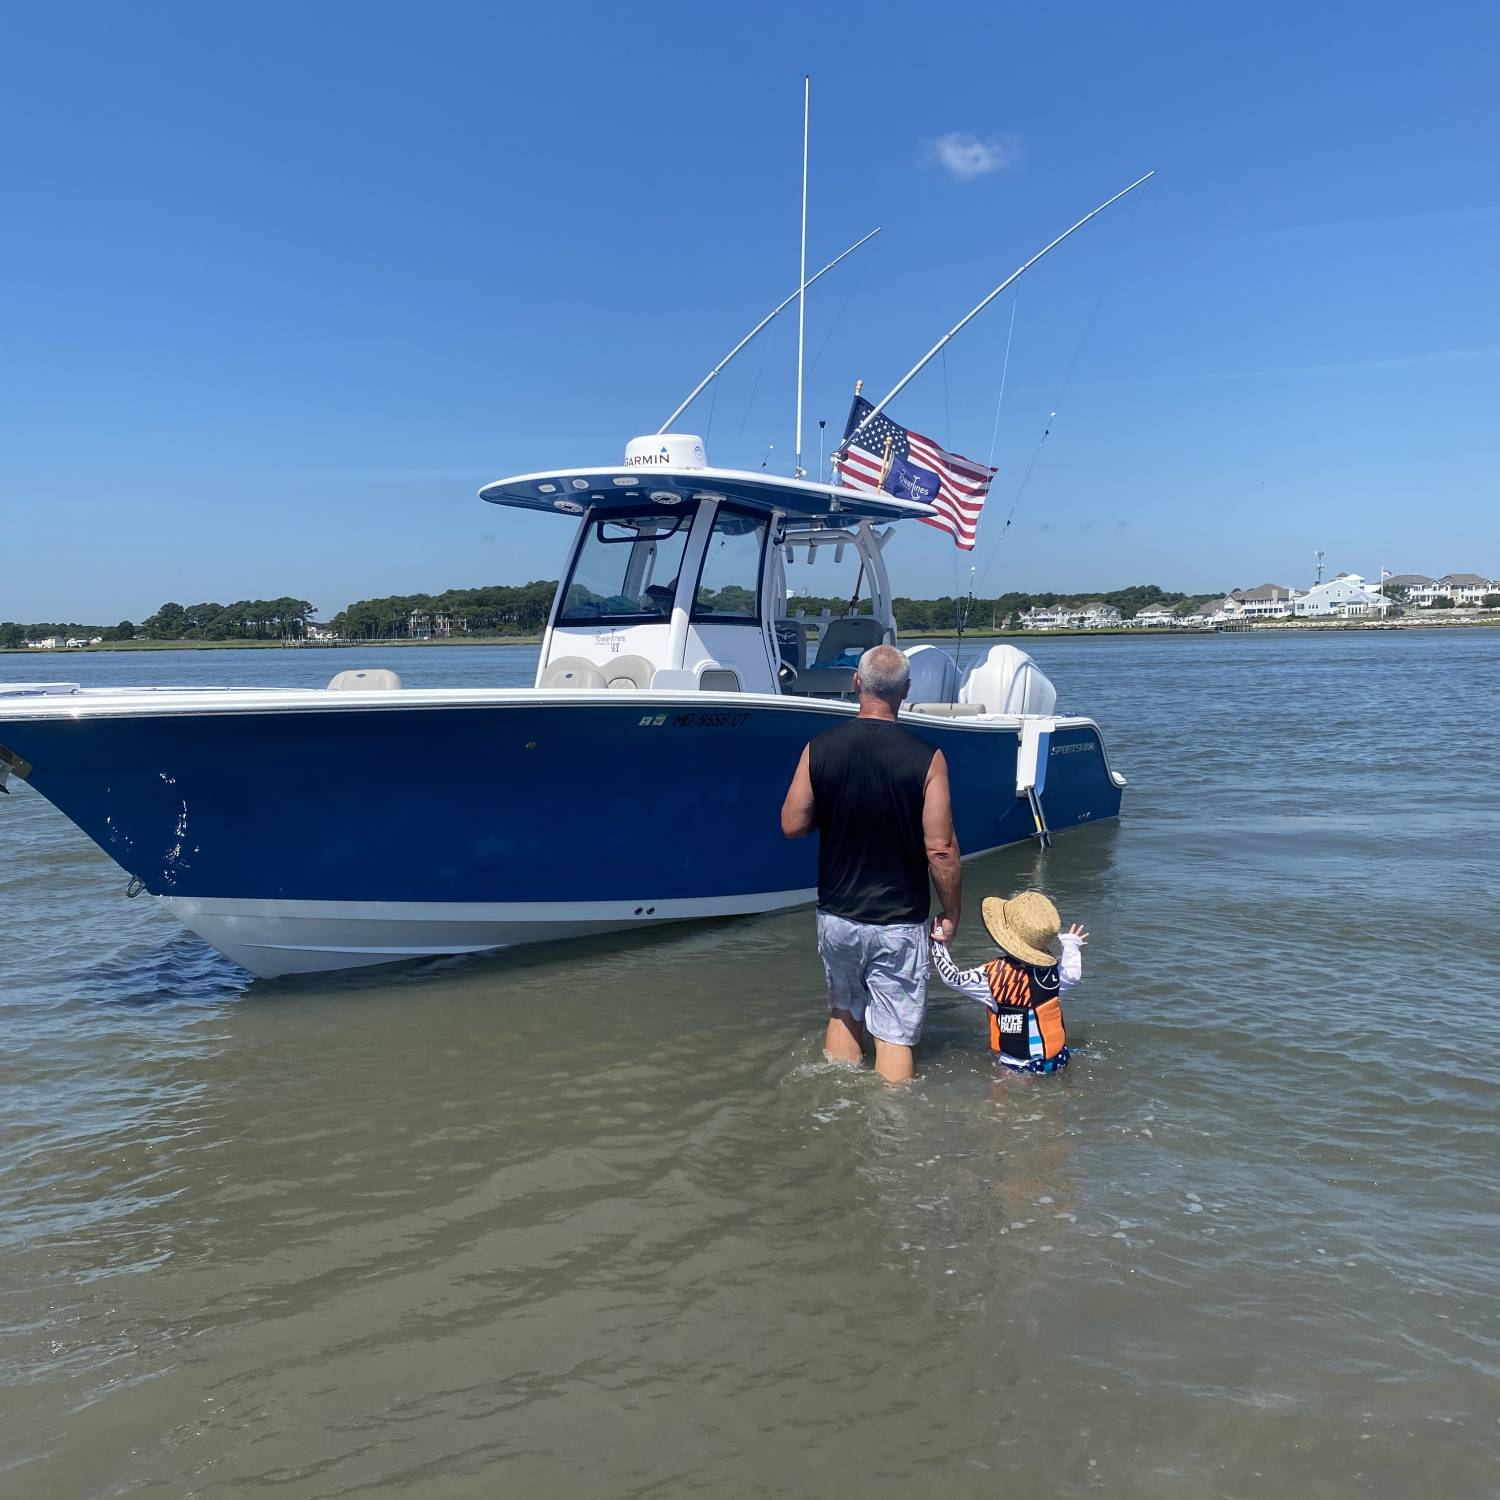 Title: G-pop & G-son enjoying the waters - On board their Sportsman Open 282 Center Console - Location: Ocean City MD. Participating in the Photo Contest #SportsmanAugust